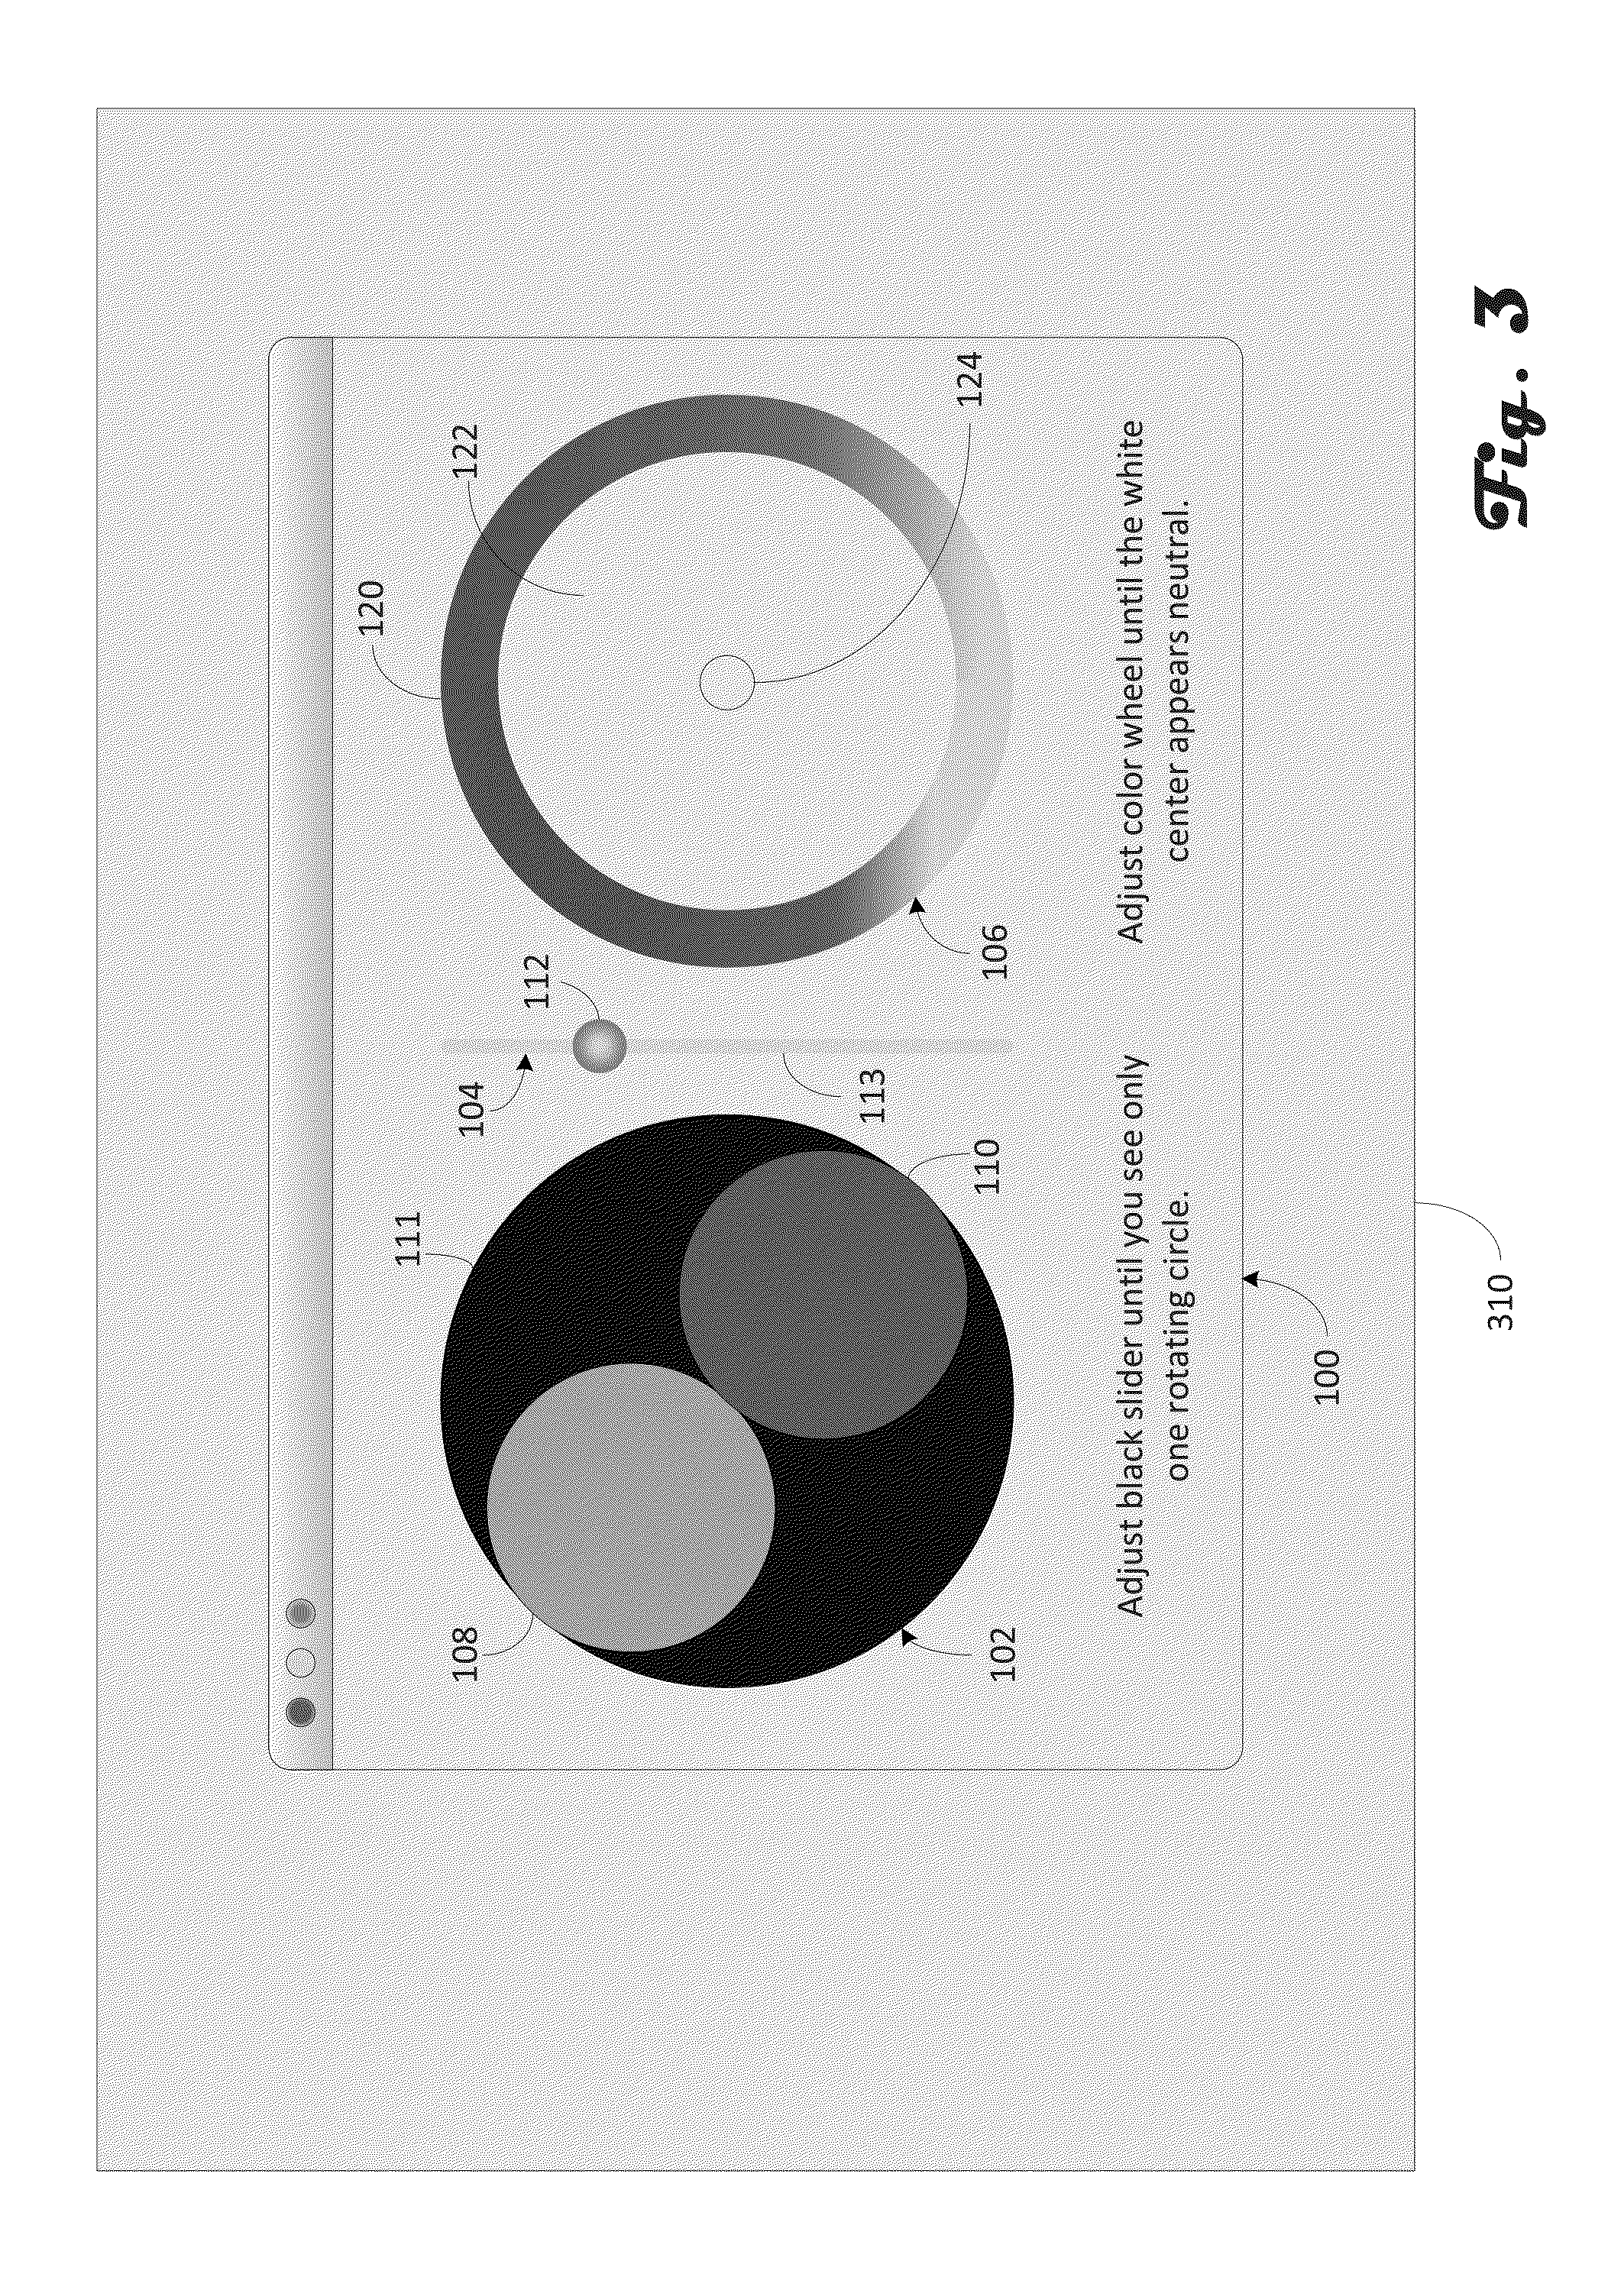 User Interface and Method for Directly Setting Display White Point